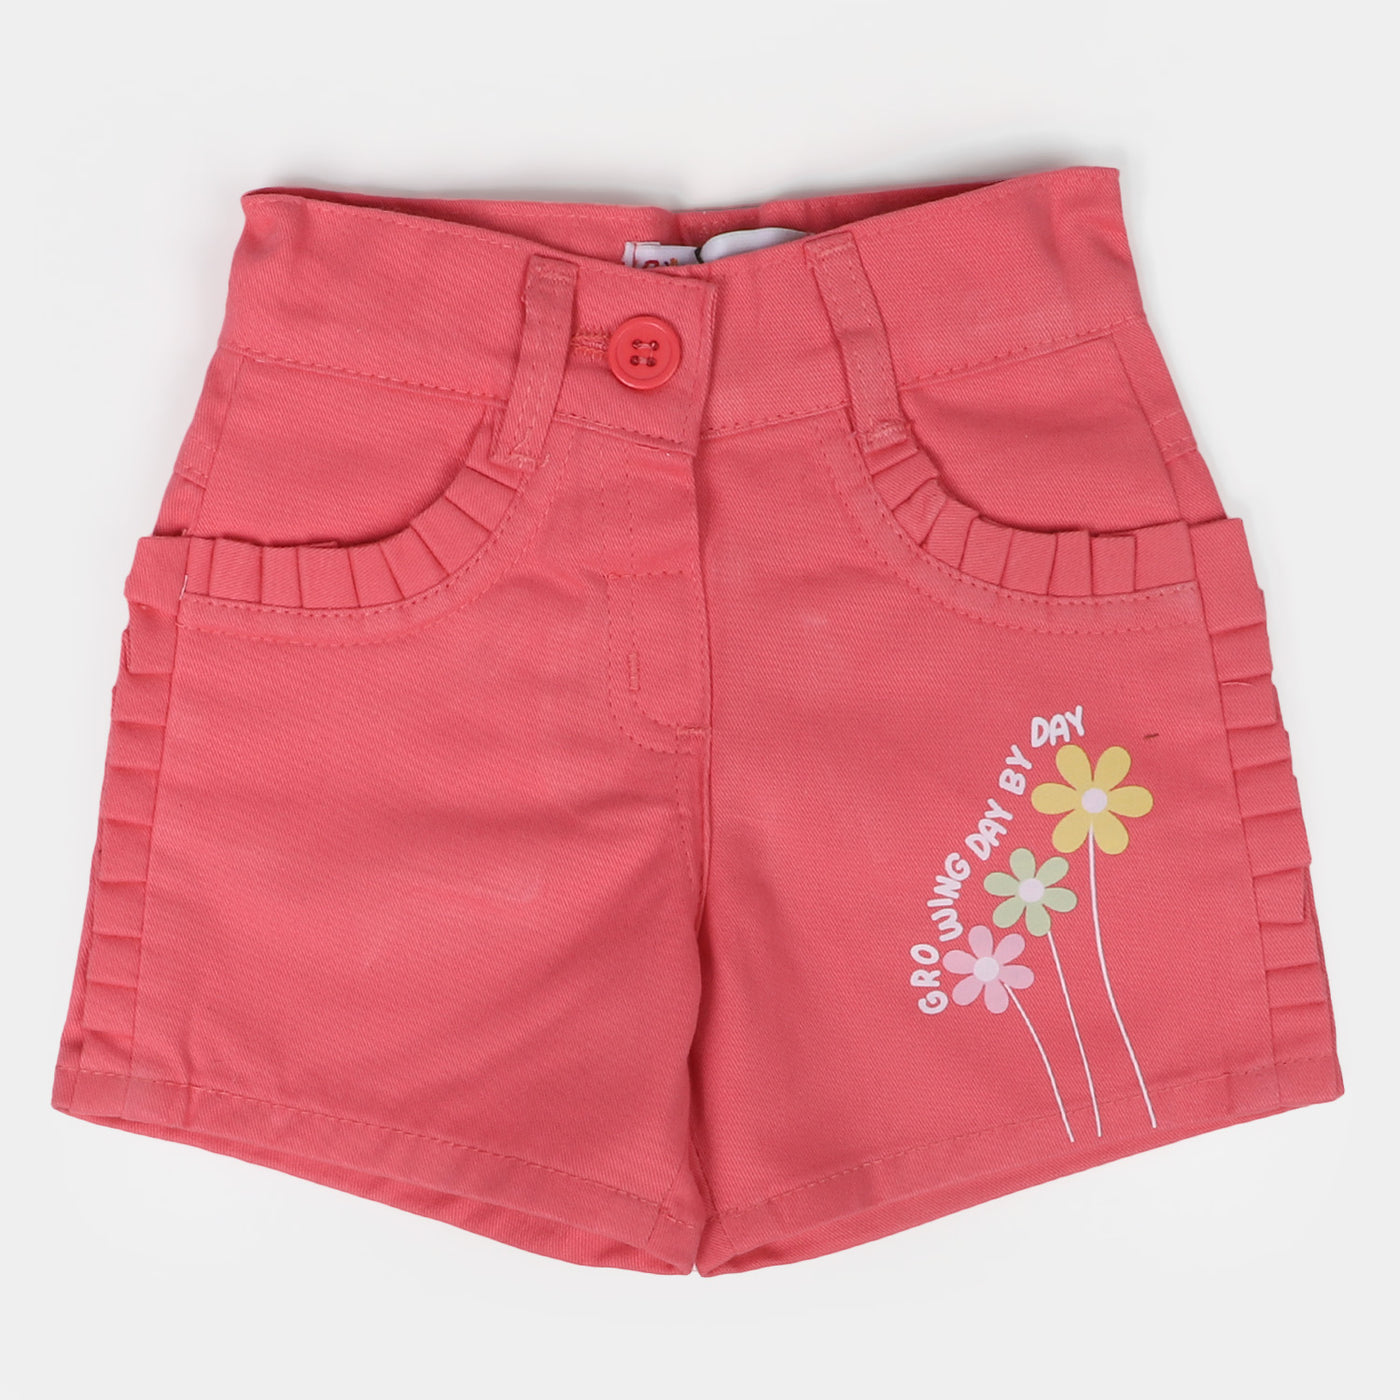 Infant Girls Cotton Short Growing Day By Day - Peach